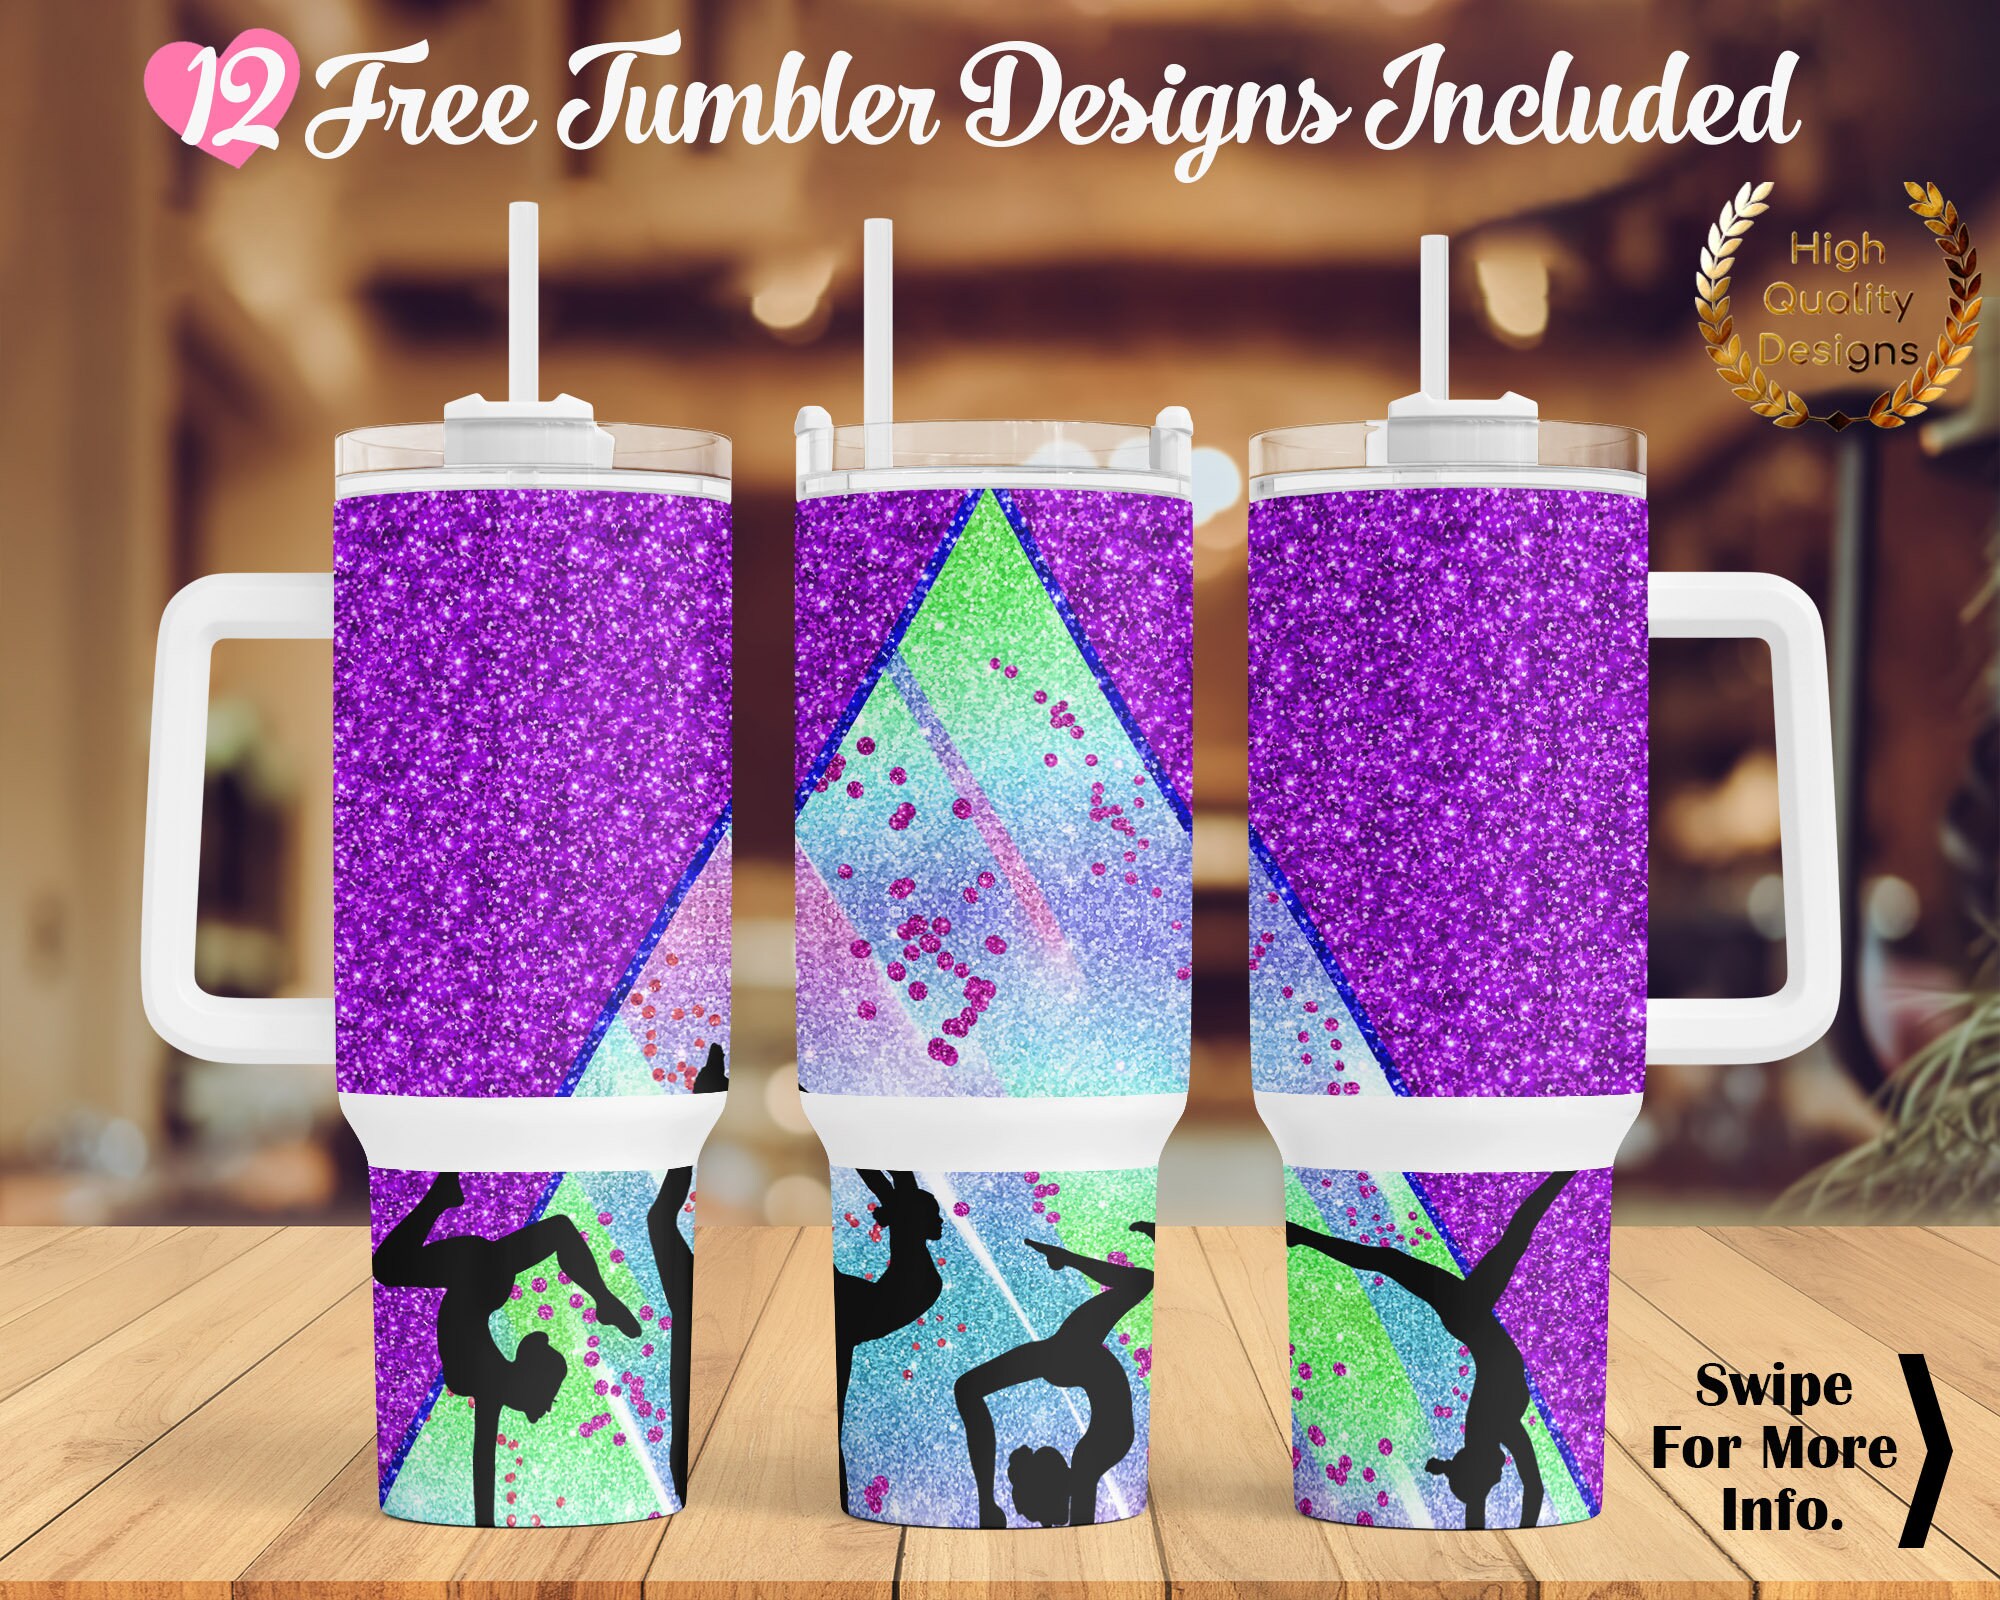 40oz Sublimation Glitter Shimmer Tumbler with Handle – AllieSignature